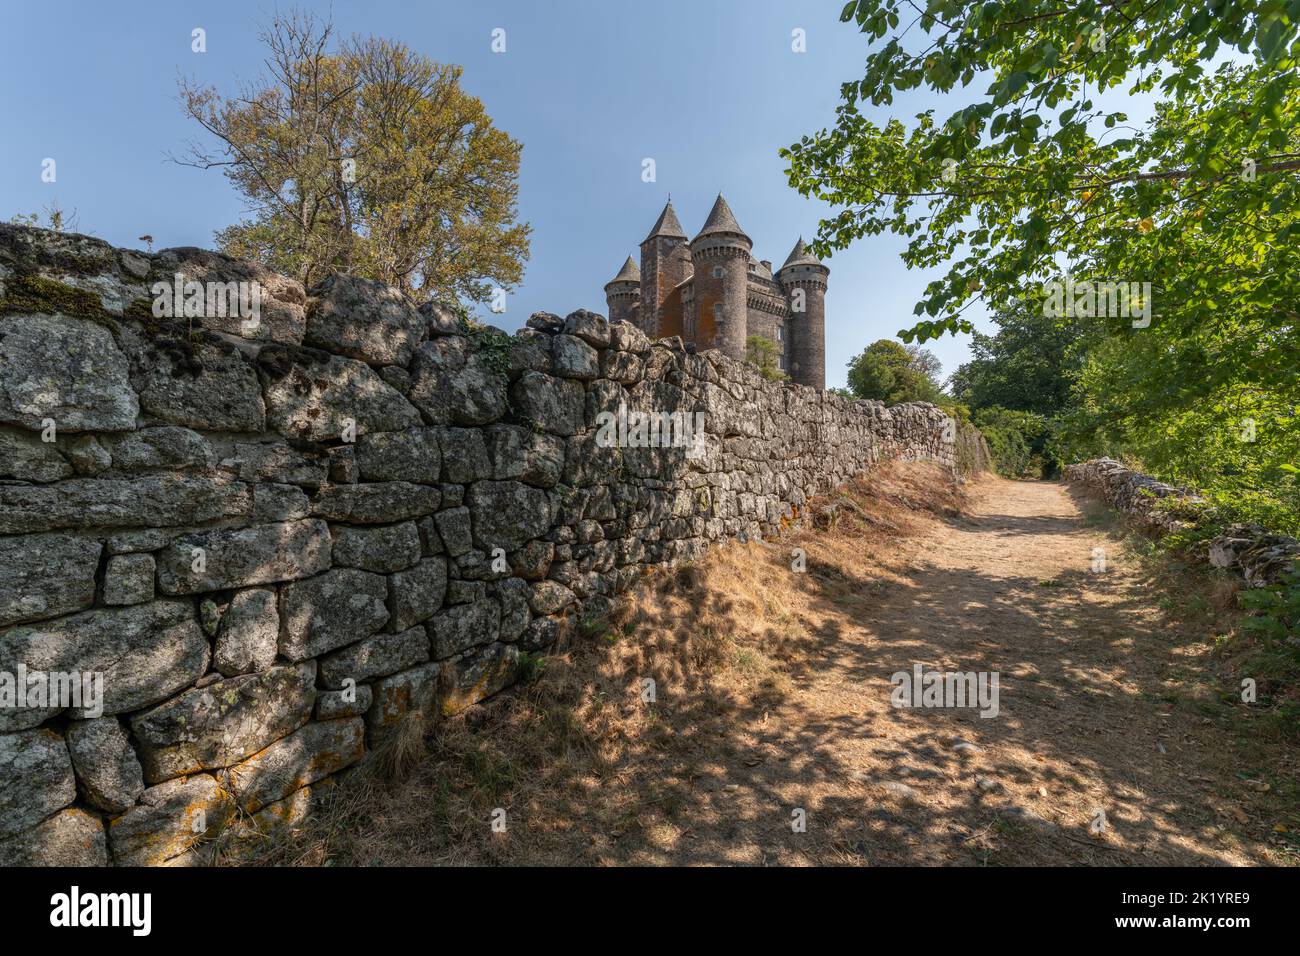 Bousquet castle from the 14th century, classified as a historical monument. Montpeyroux, Aveyron, France. Stock Photo